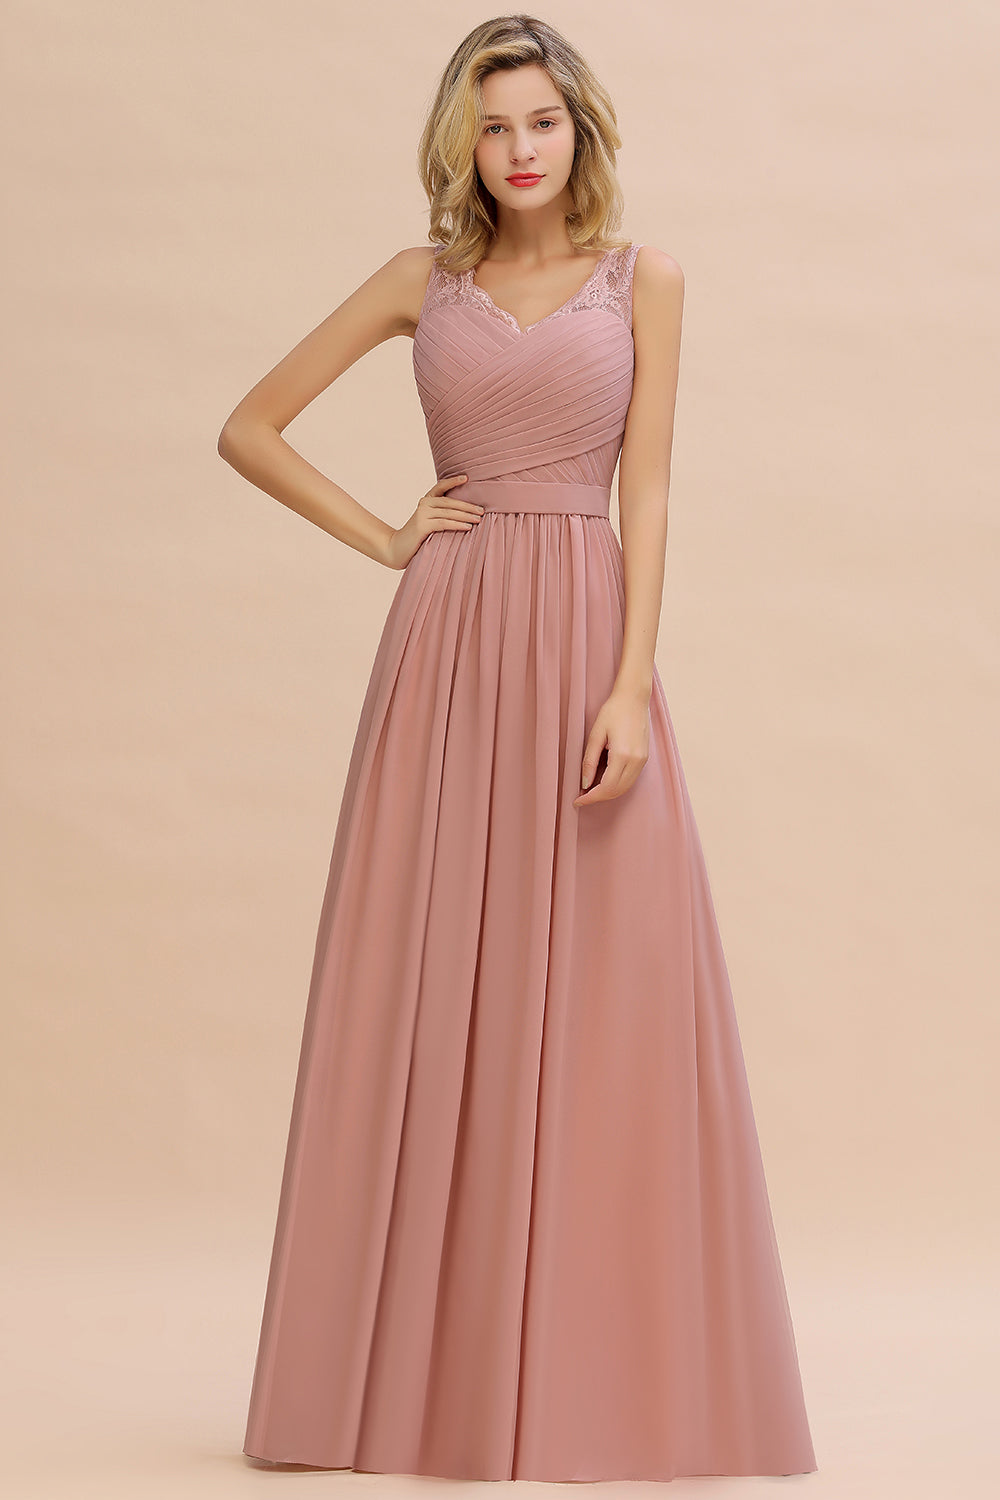 Load image into Gallery viewer, Classy Long A-line V-neck Wide Straps Ruched Chiffon Bridesmaid Dress-BIZTUNNEL
